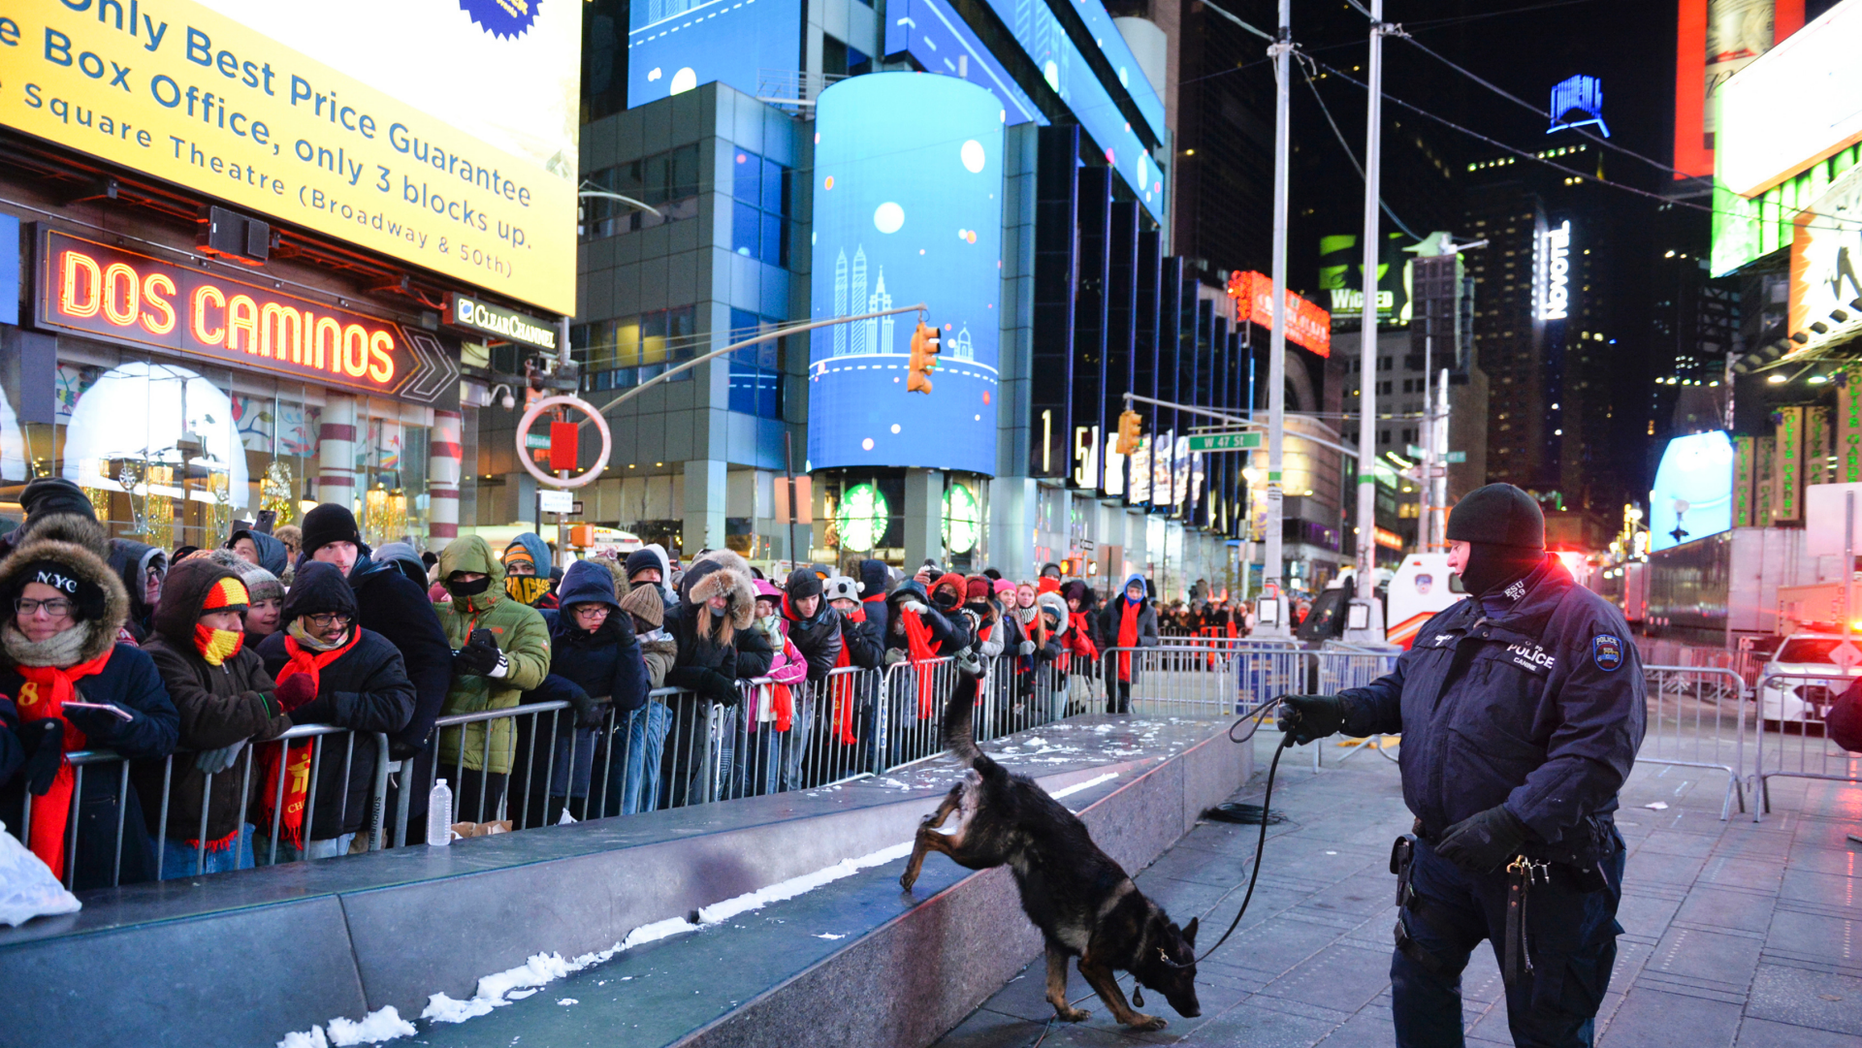 Ring in the new: NYPD drone to oversee Times Square revelry